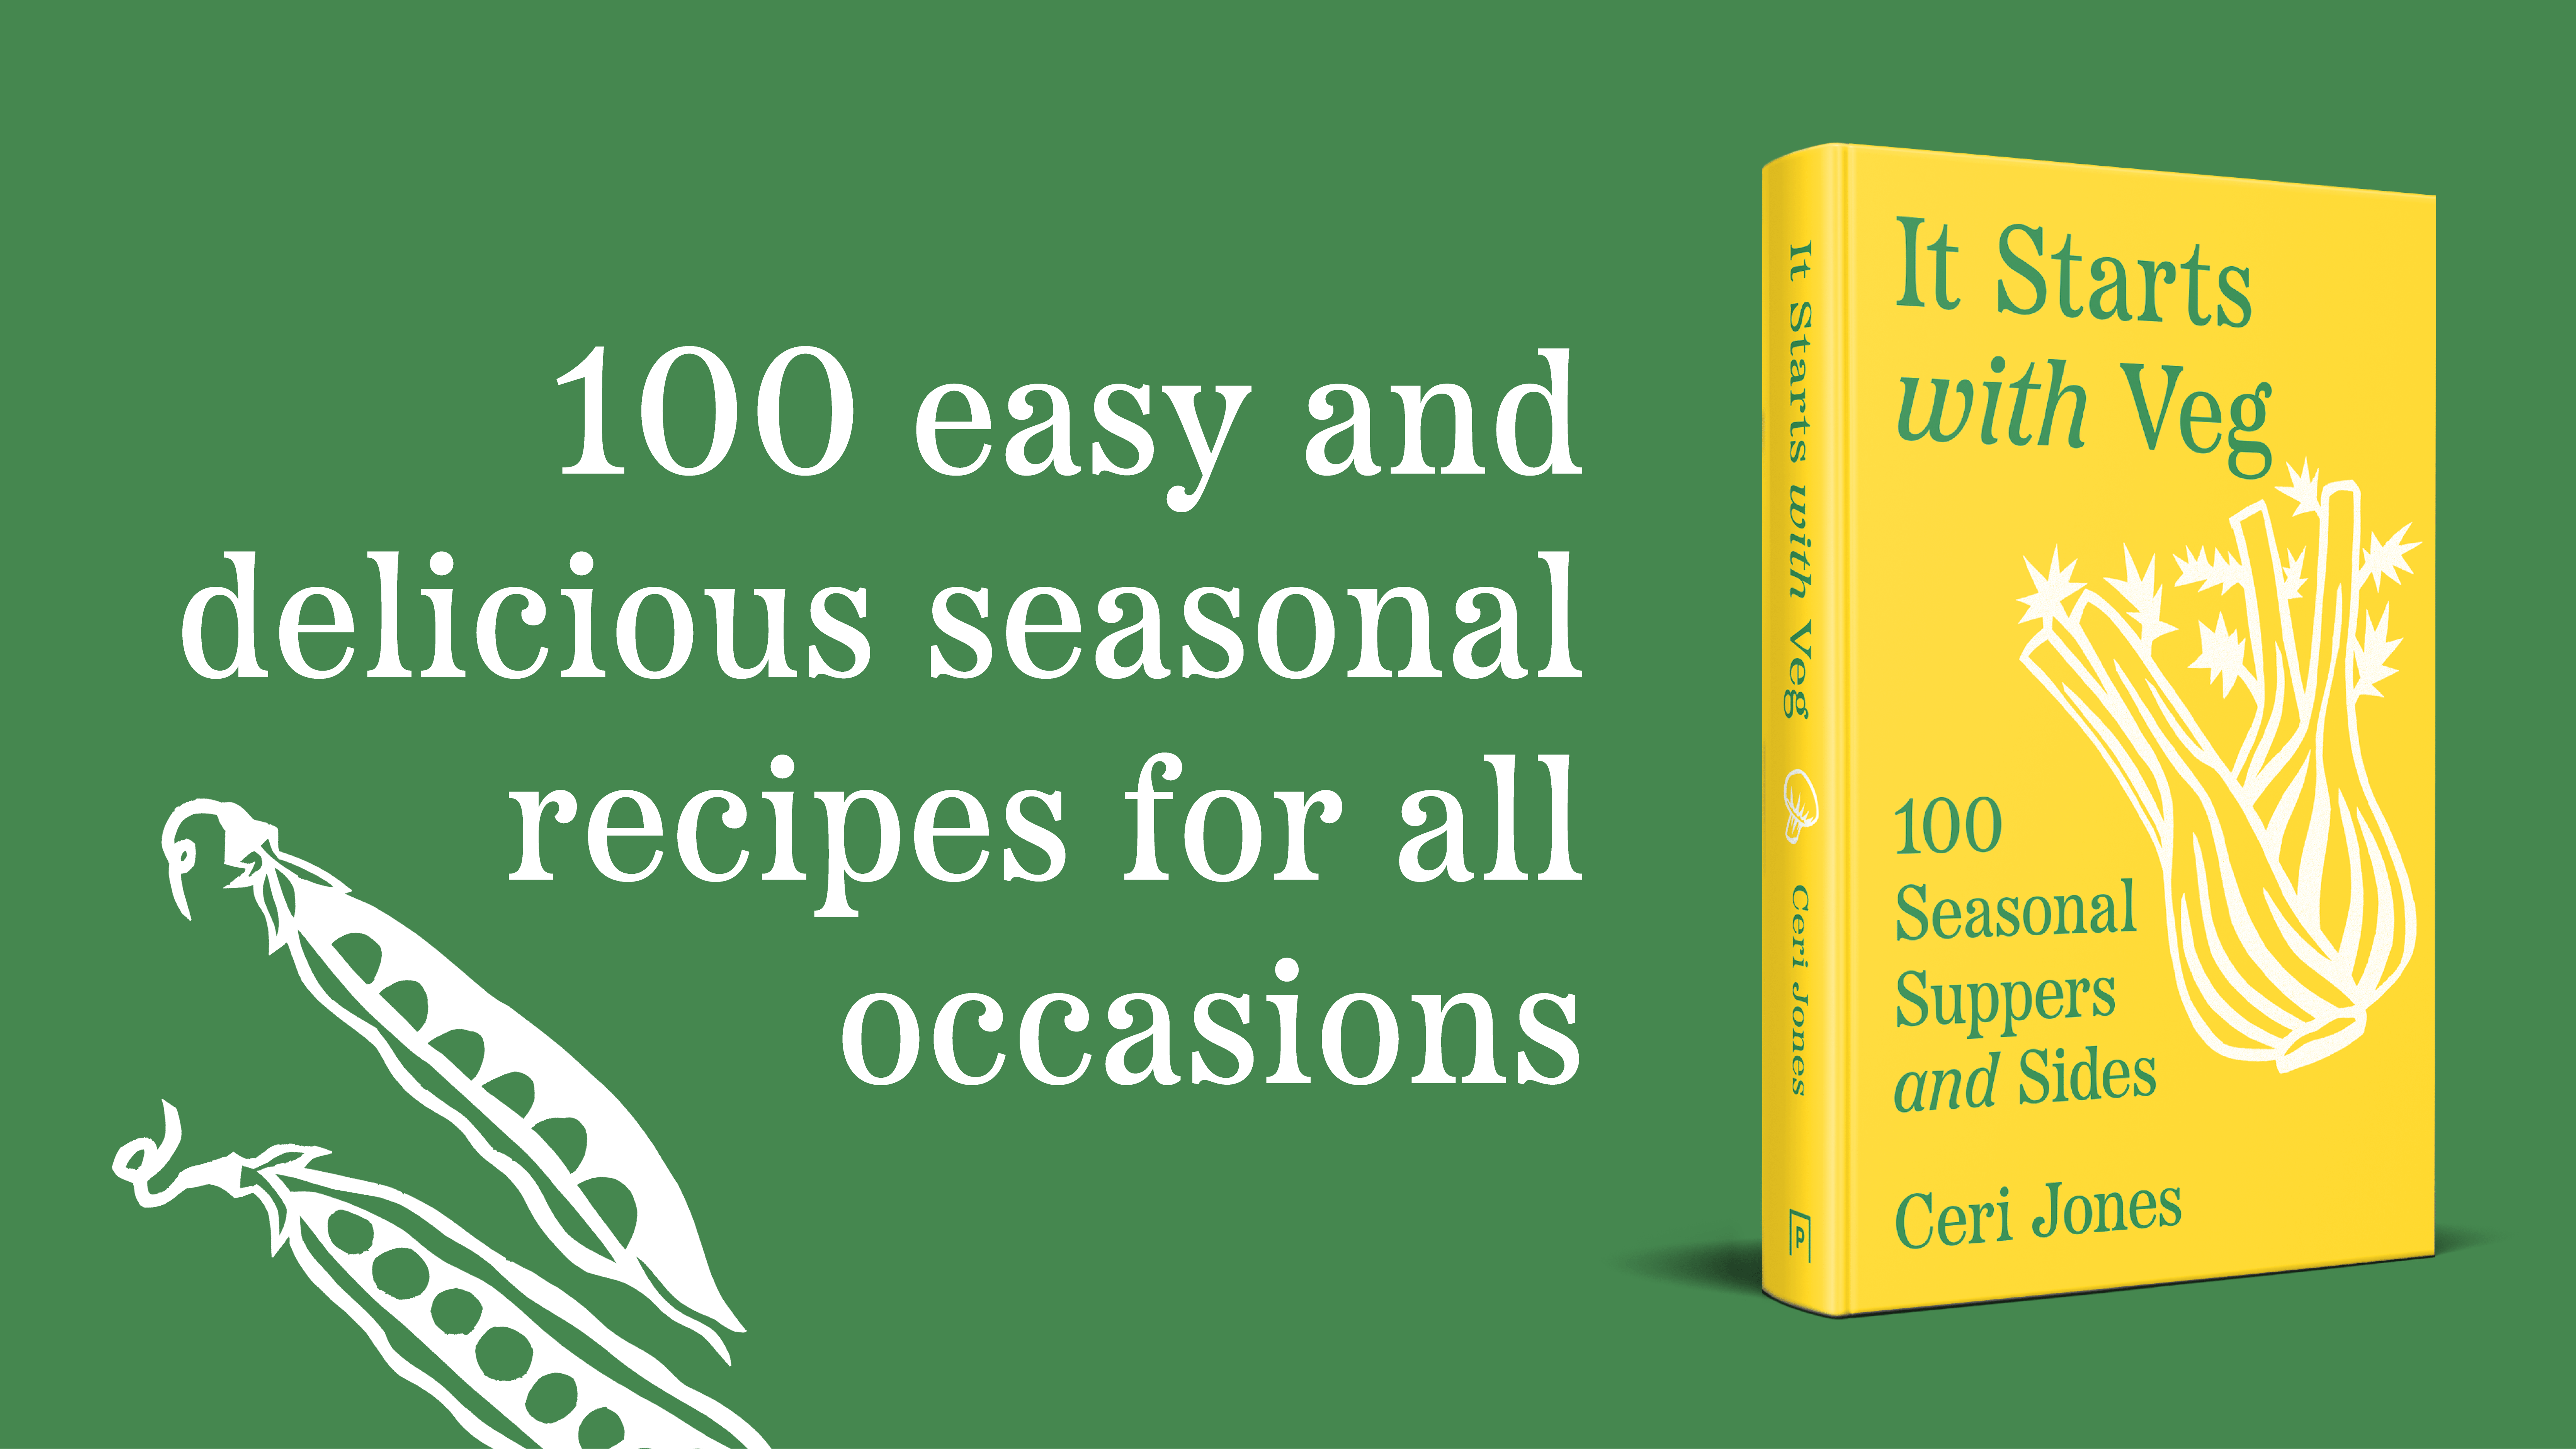 100 easy and delicious seasonal recipes for all occasions